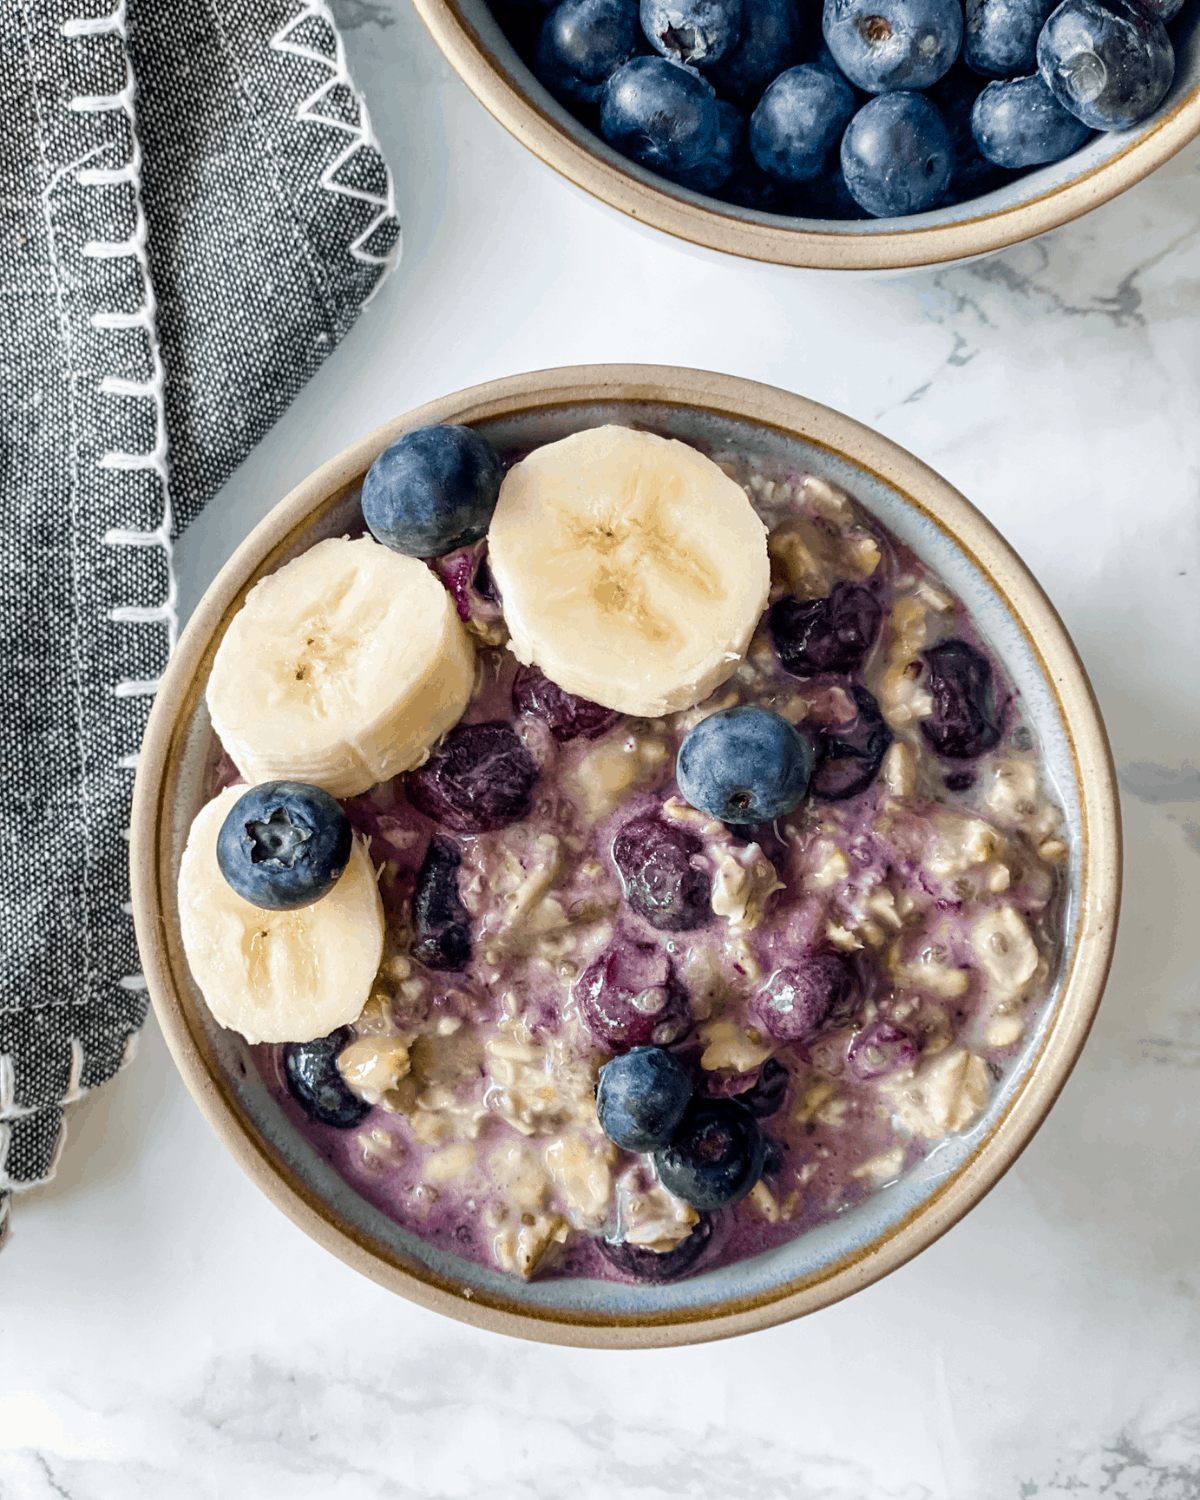 Delicious Creamy Oatmeal with Blueberries and Bananas in a Bowl